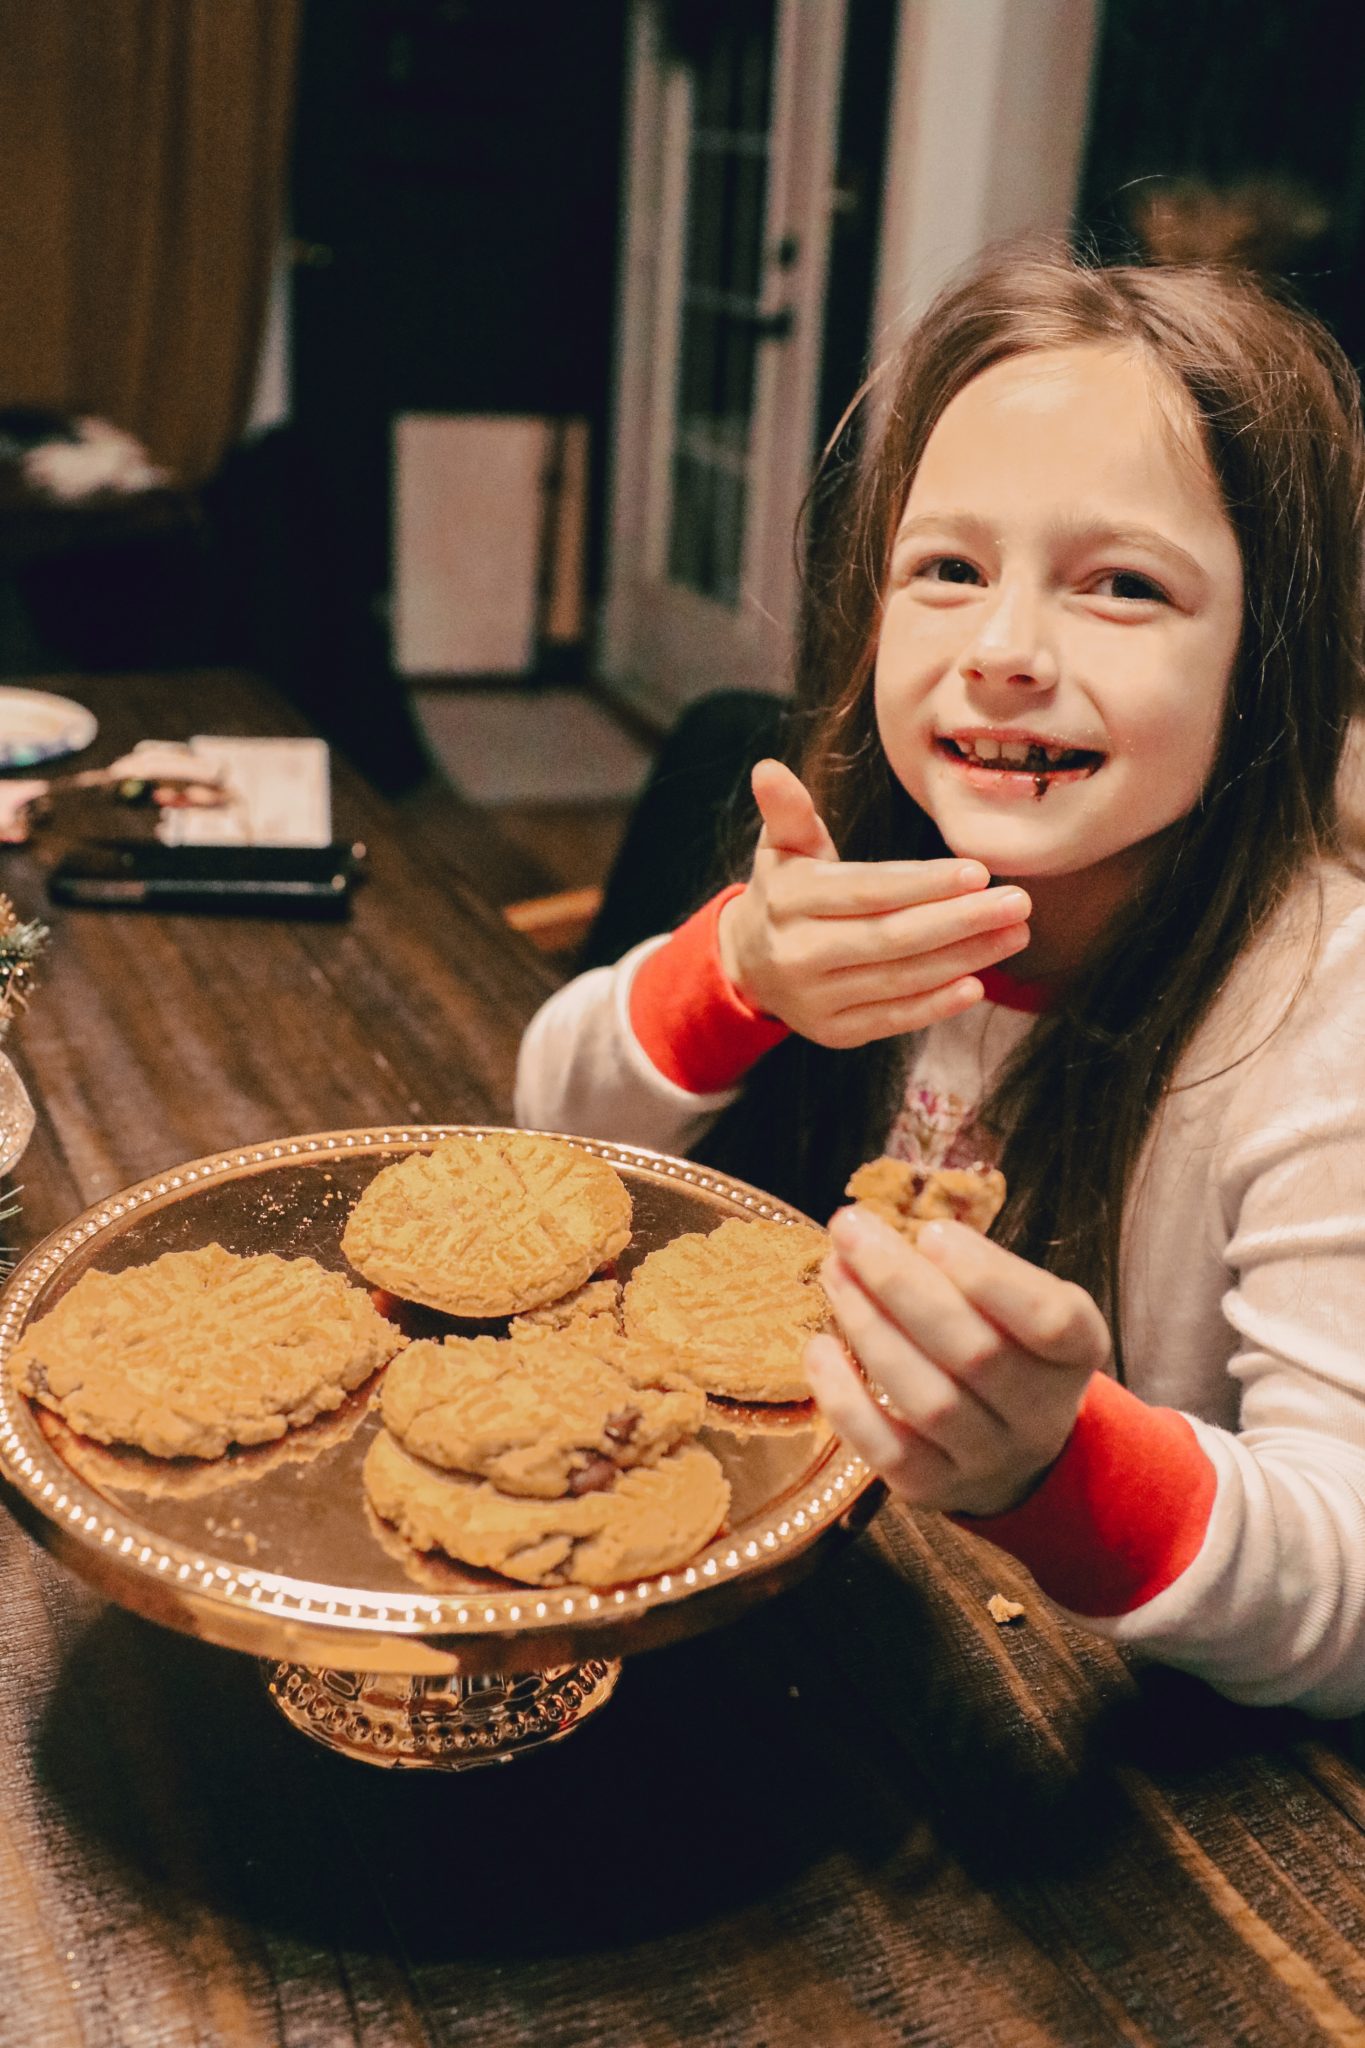 Top Nashville Lifestyle blogger shares her low carb peanut butter chocolate chip cookies recipe! 